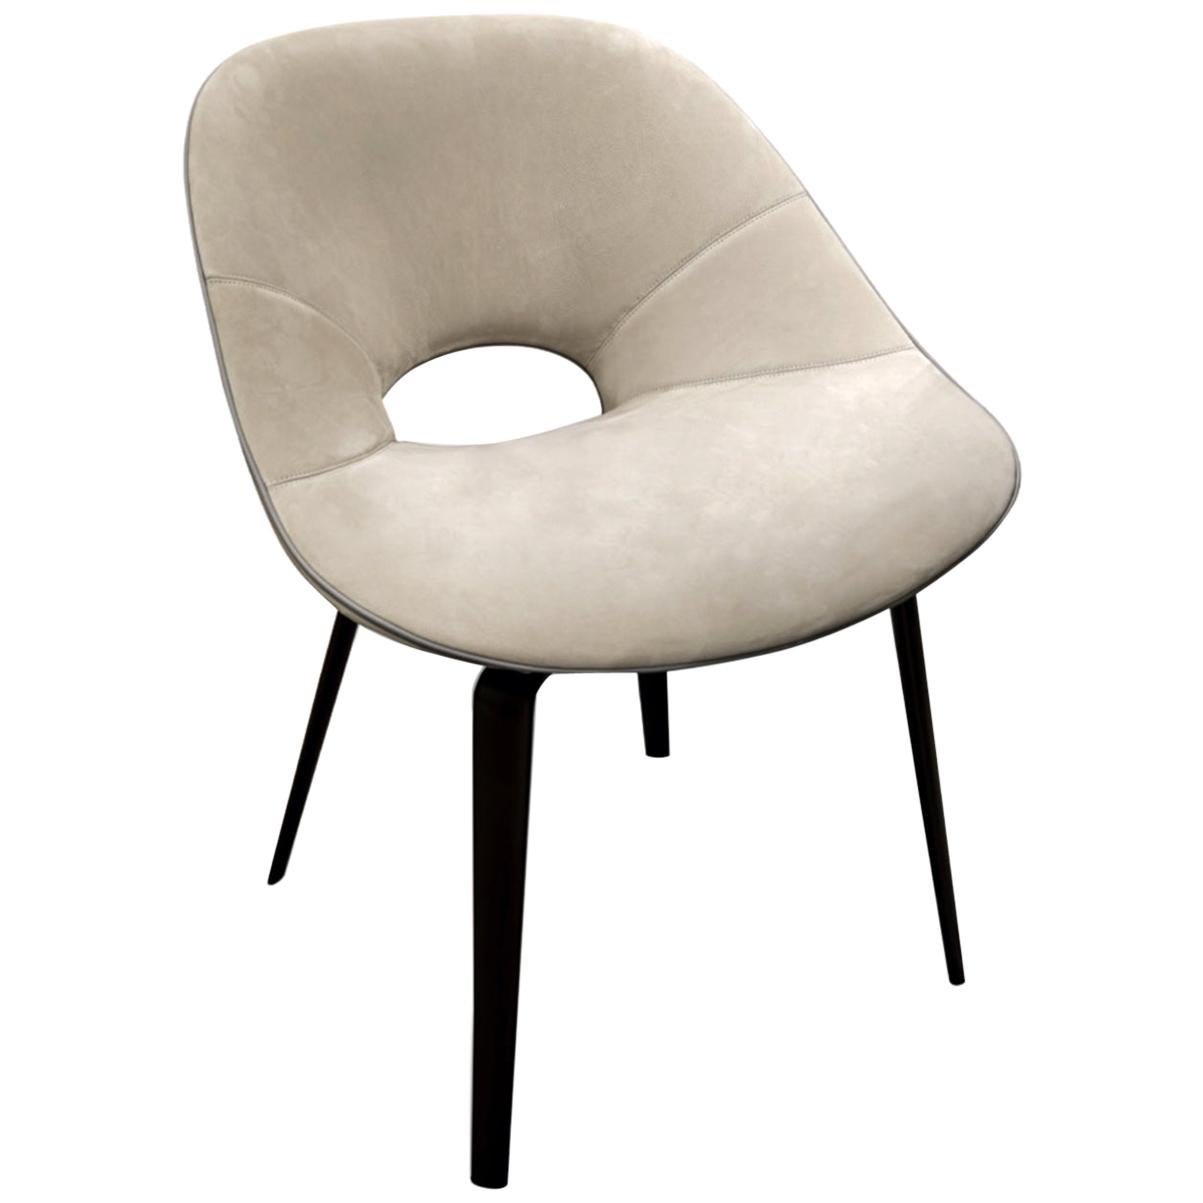 Visionnaire Tanya Armchair with Aluminum Legs and Foam Seat by Roberto Lazzeroni